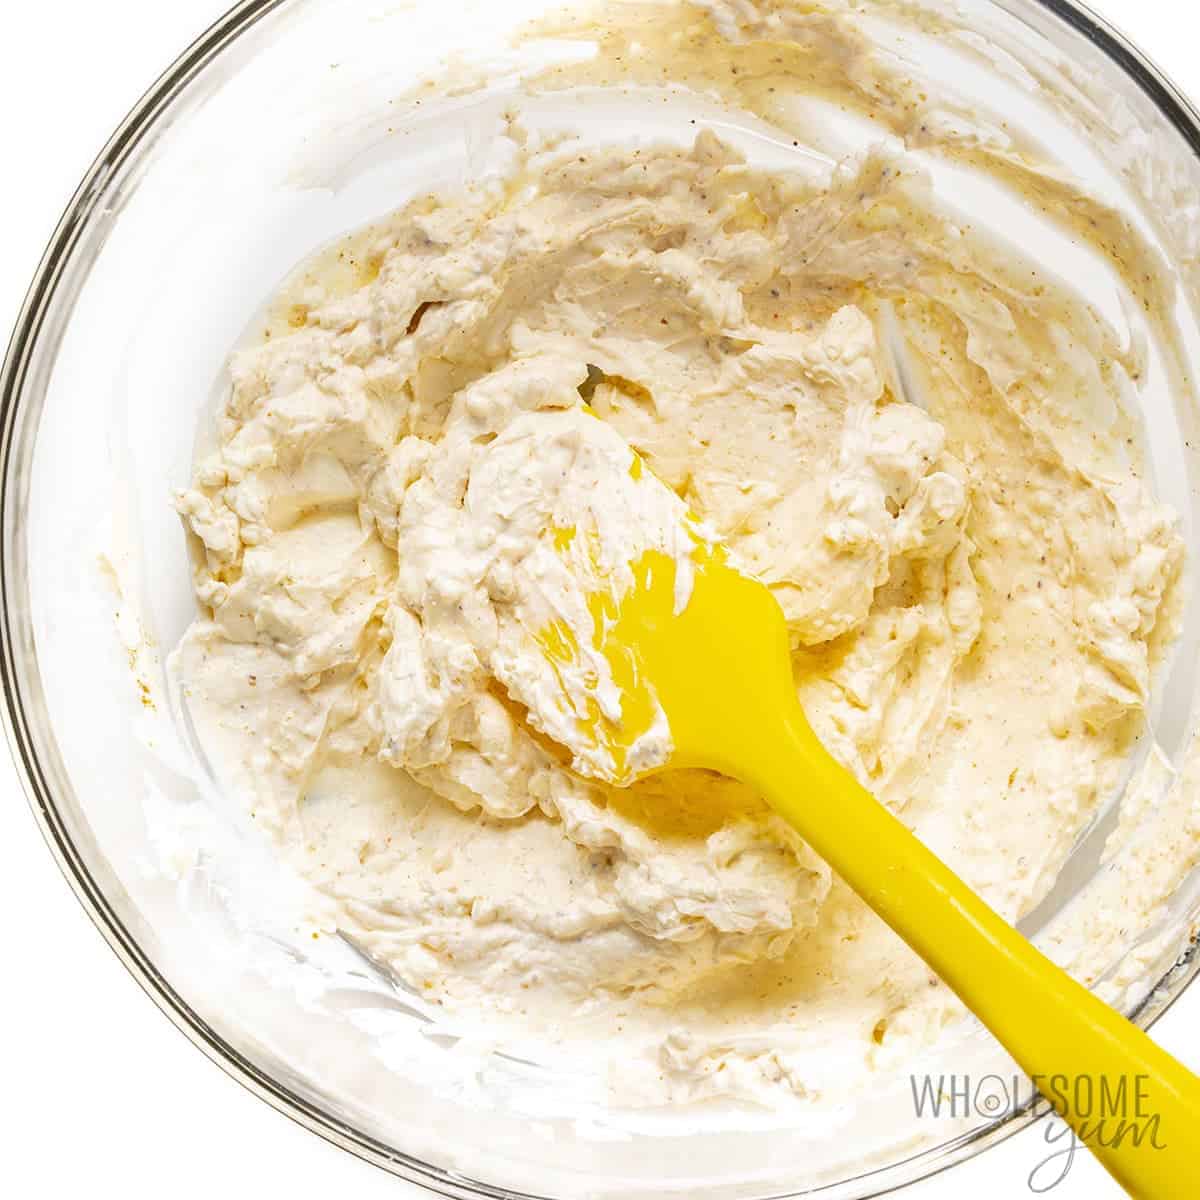 Cream cheese, sour cream, mayonnaise, lemon juice, and Old Bay seasoning mixed in a bowl.